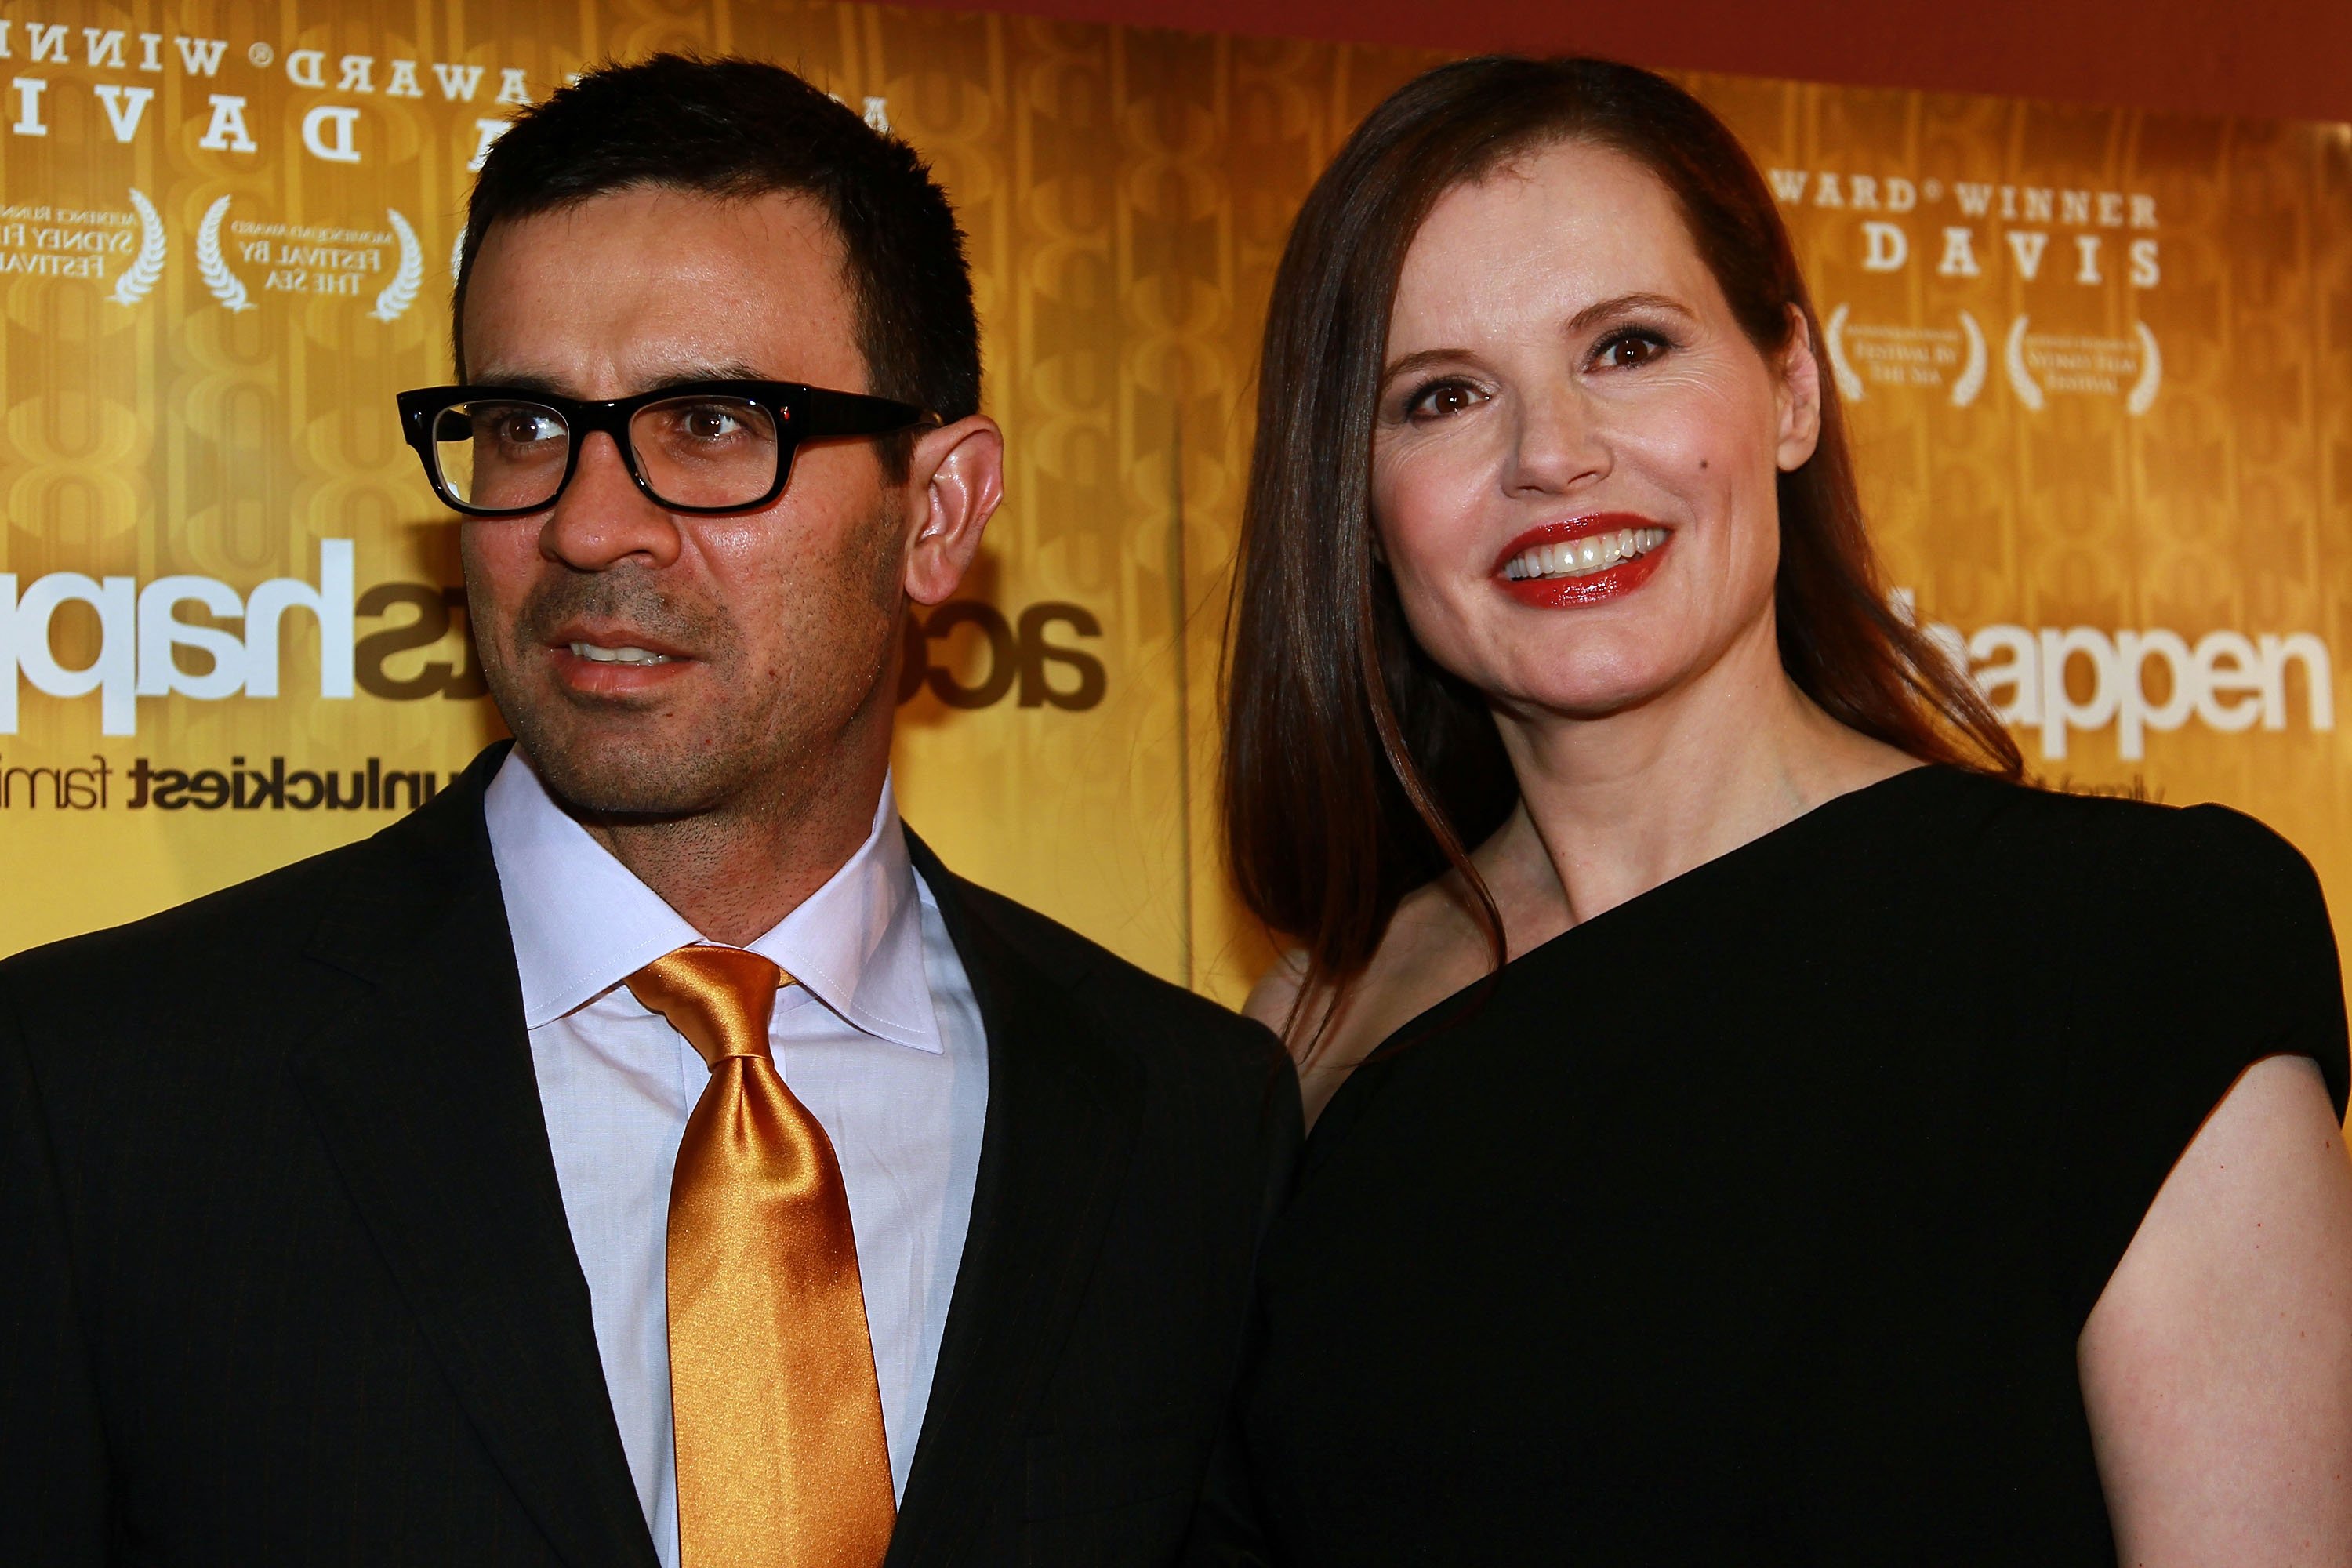 Reza Jarrahy and Geena Davis during the premiere of "Accidents Happen" at The Cremorne Orpheum on April 14, 2010 in Sydney, Australia. / Source: Getty Images